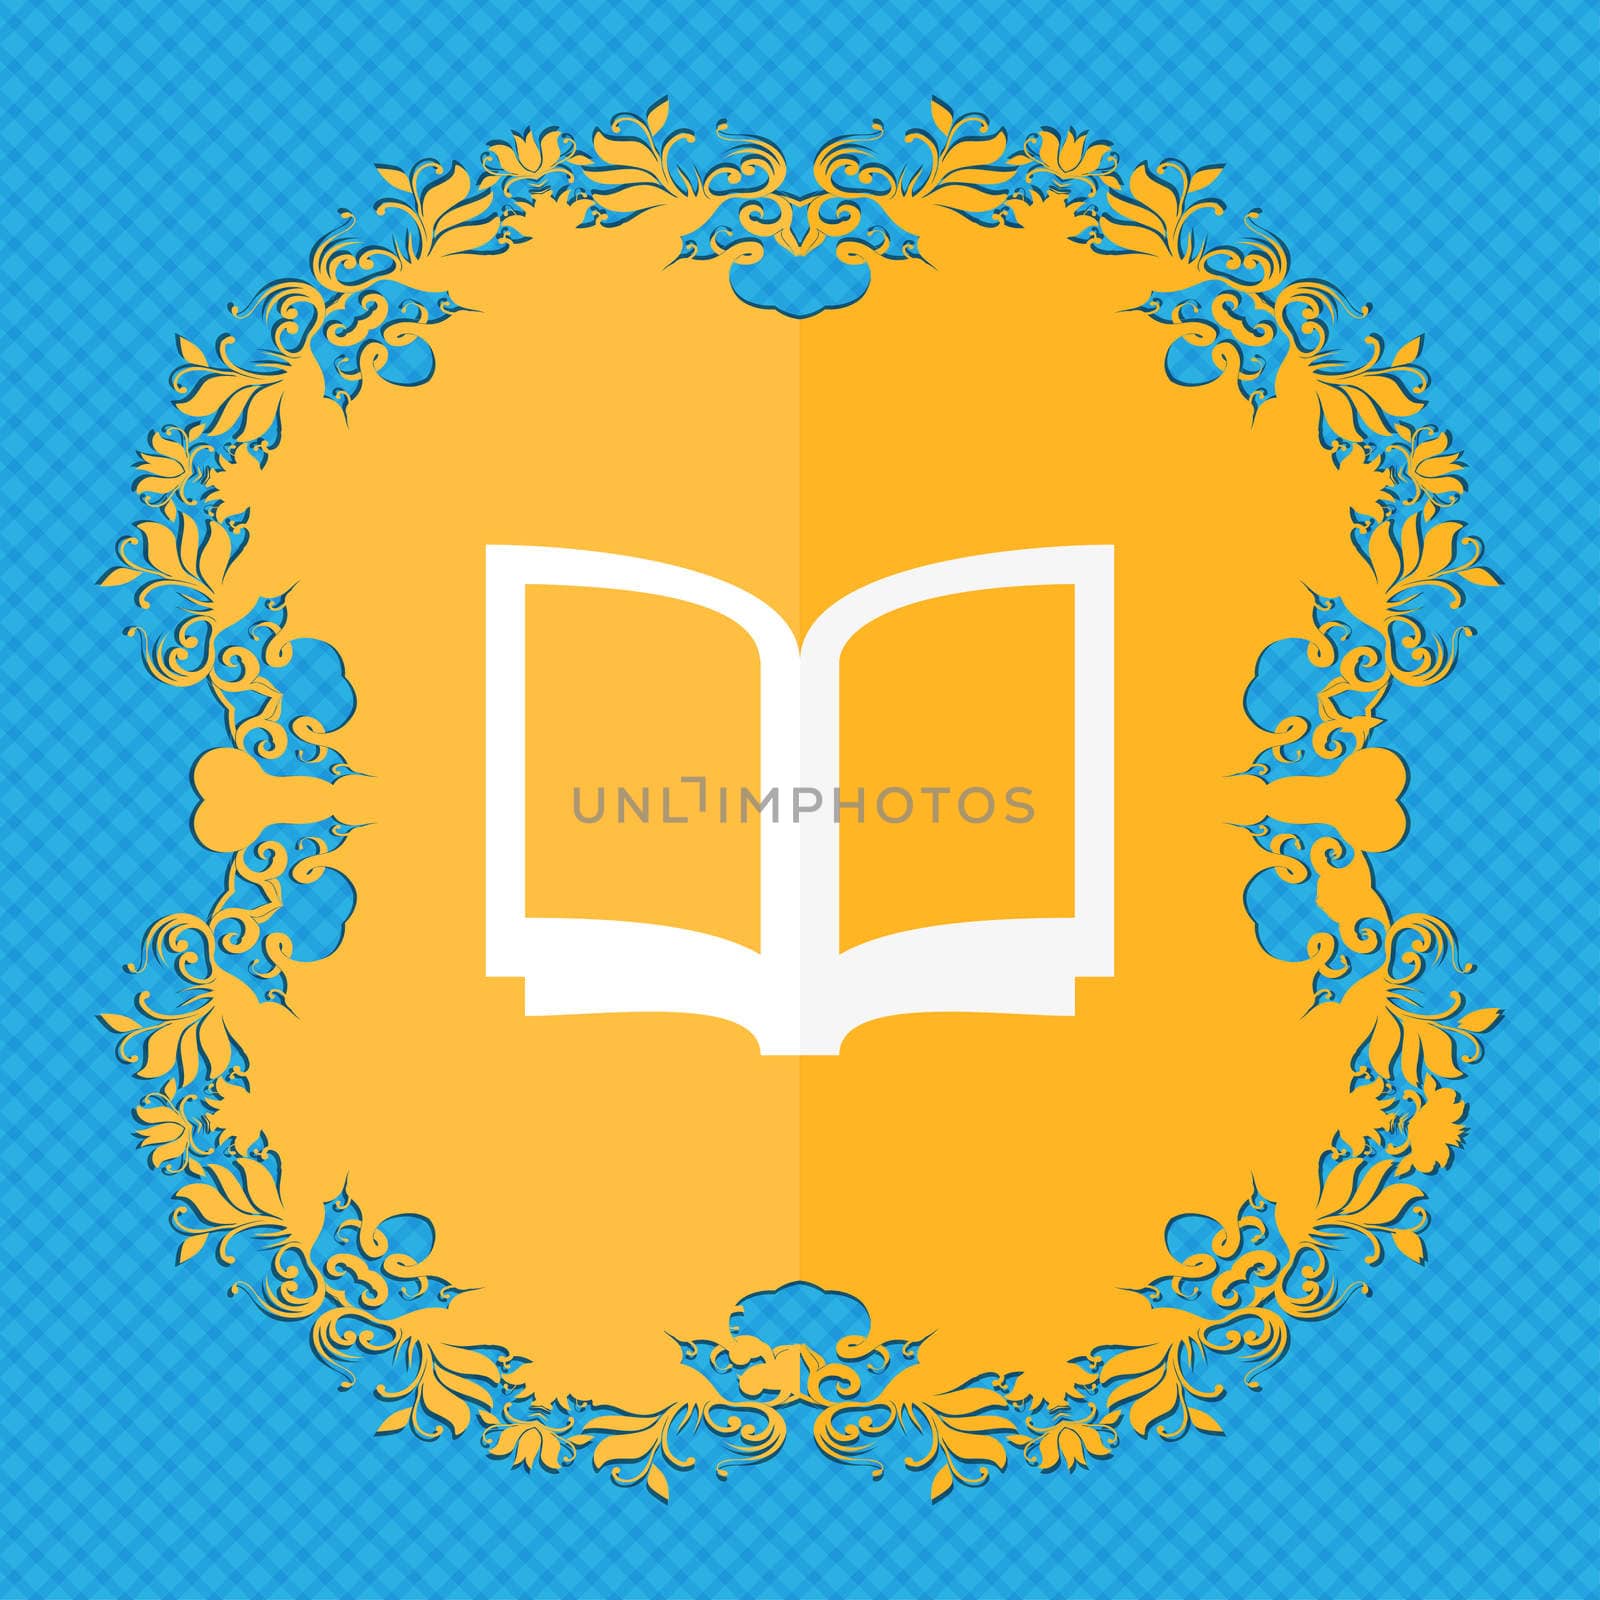 Open book . Floral flat design on a blue abstract background with place for your text. illustration